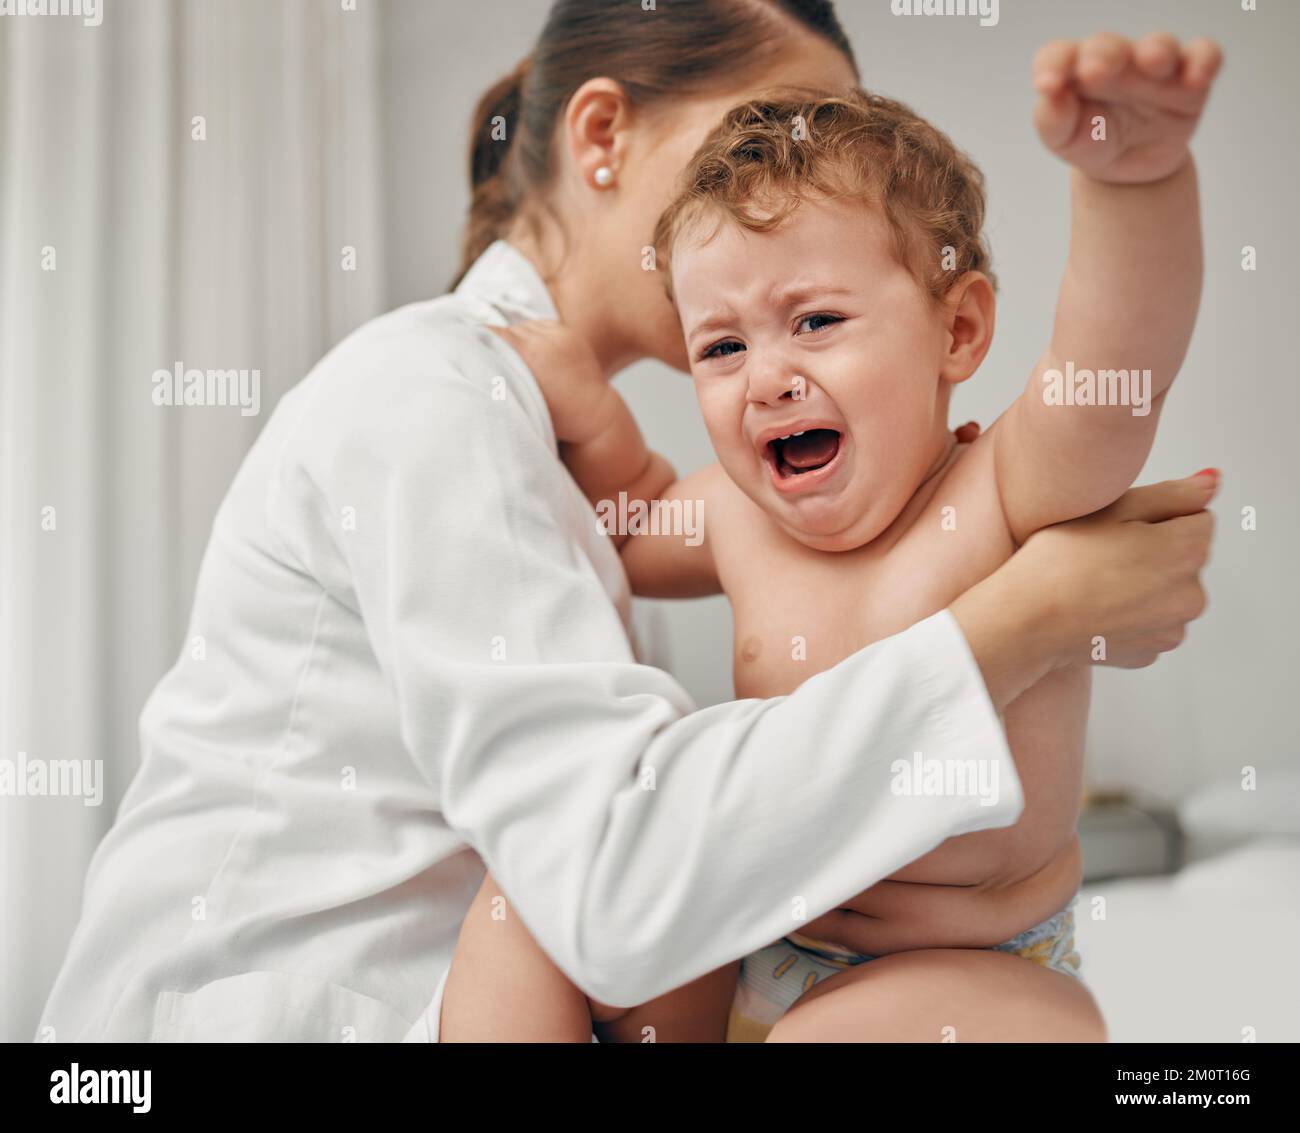 Were almost done. a little baby crying while being examined by a doctor. Stock Photo